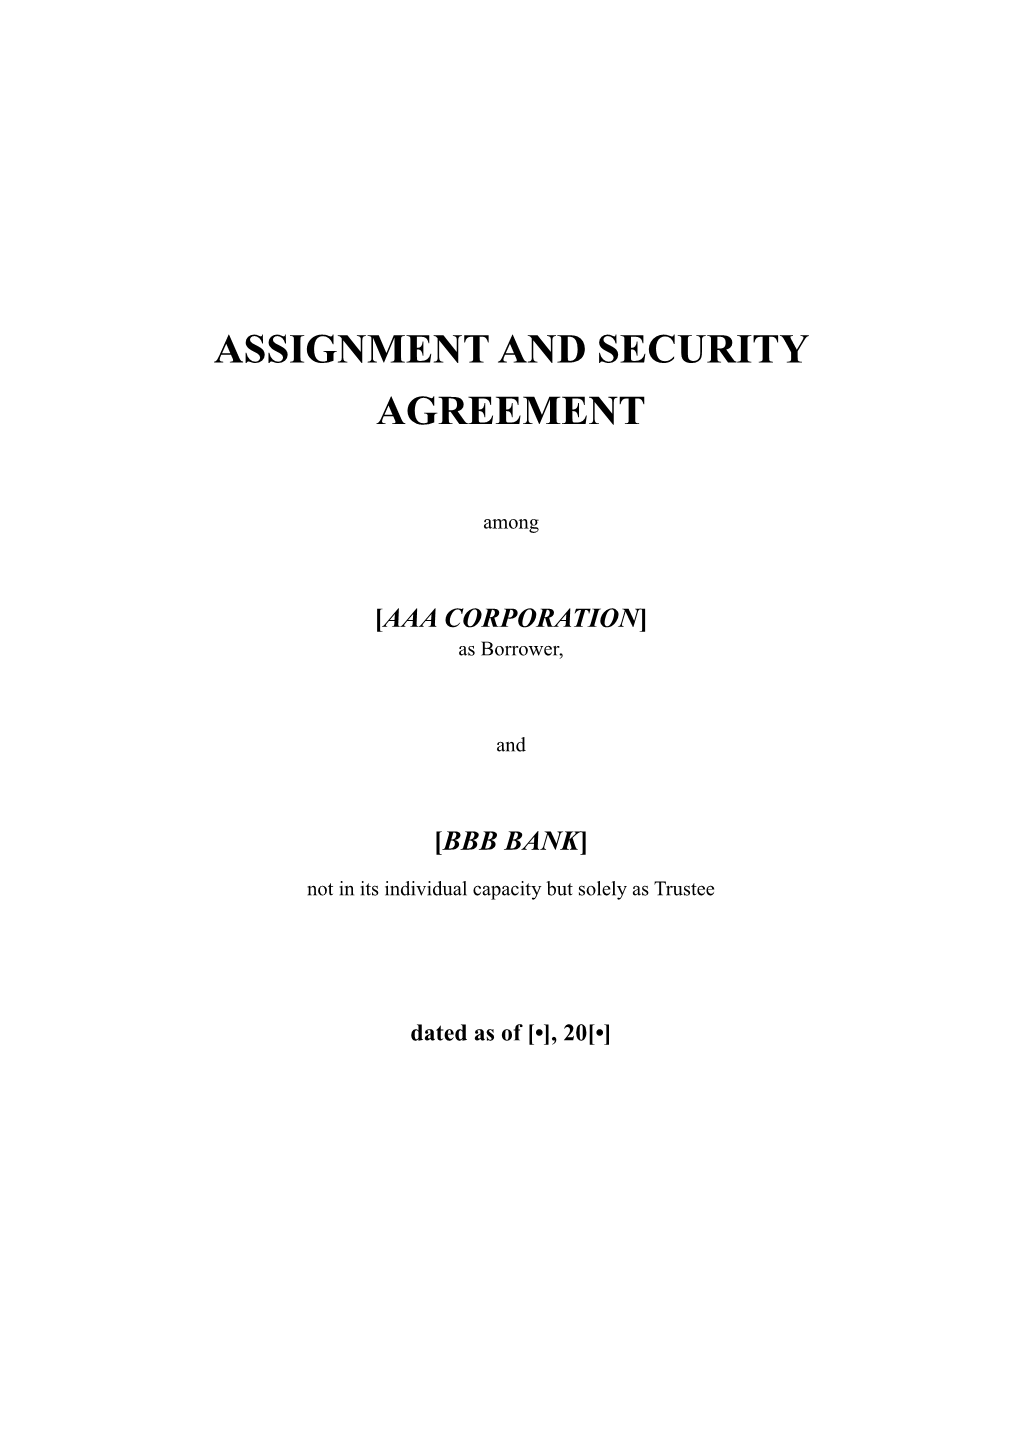 Assignment and Security Agreement